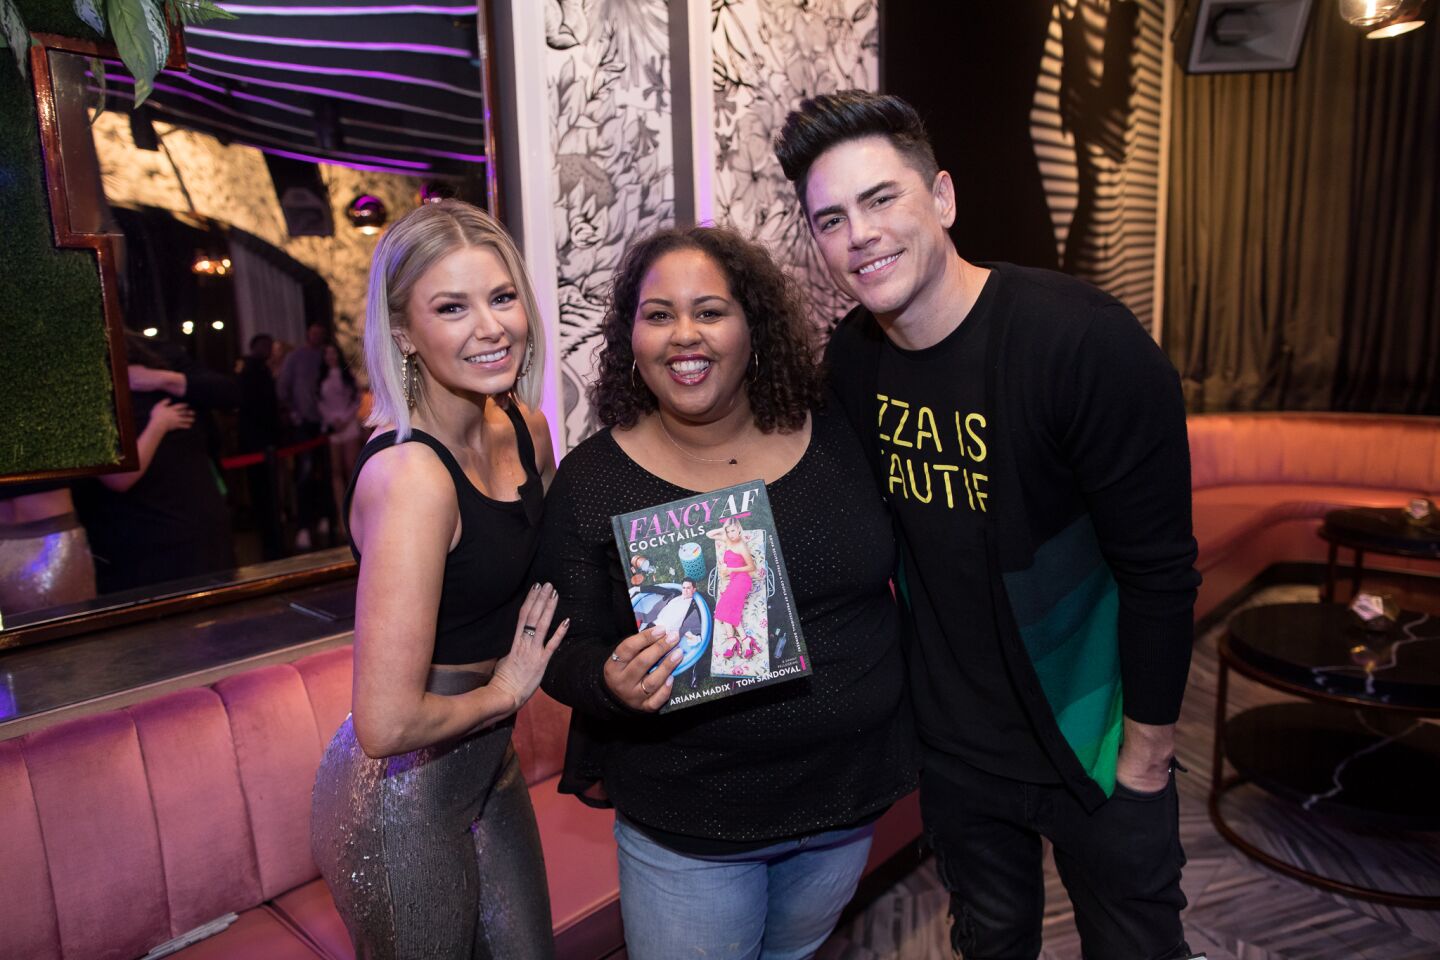 Book signing with Tom Sandoval and Ariana Madix